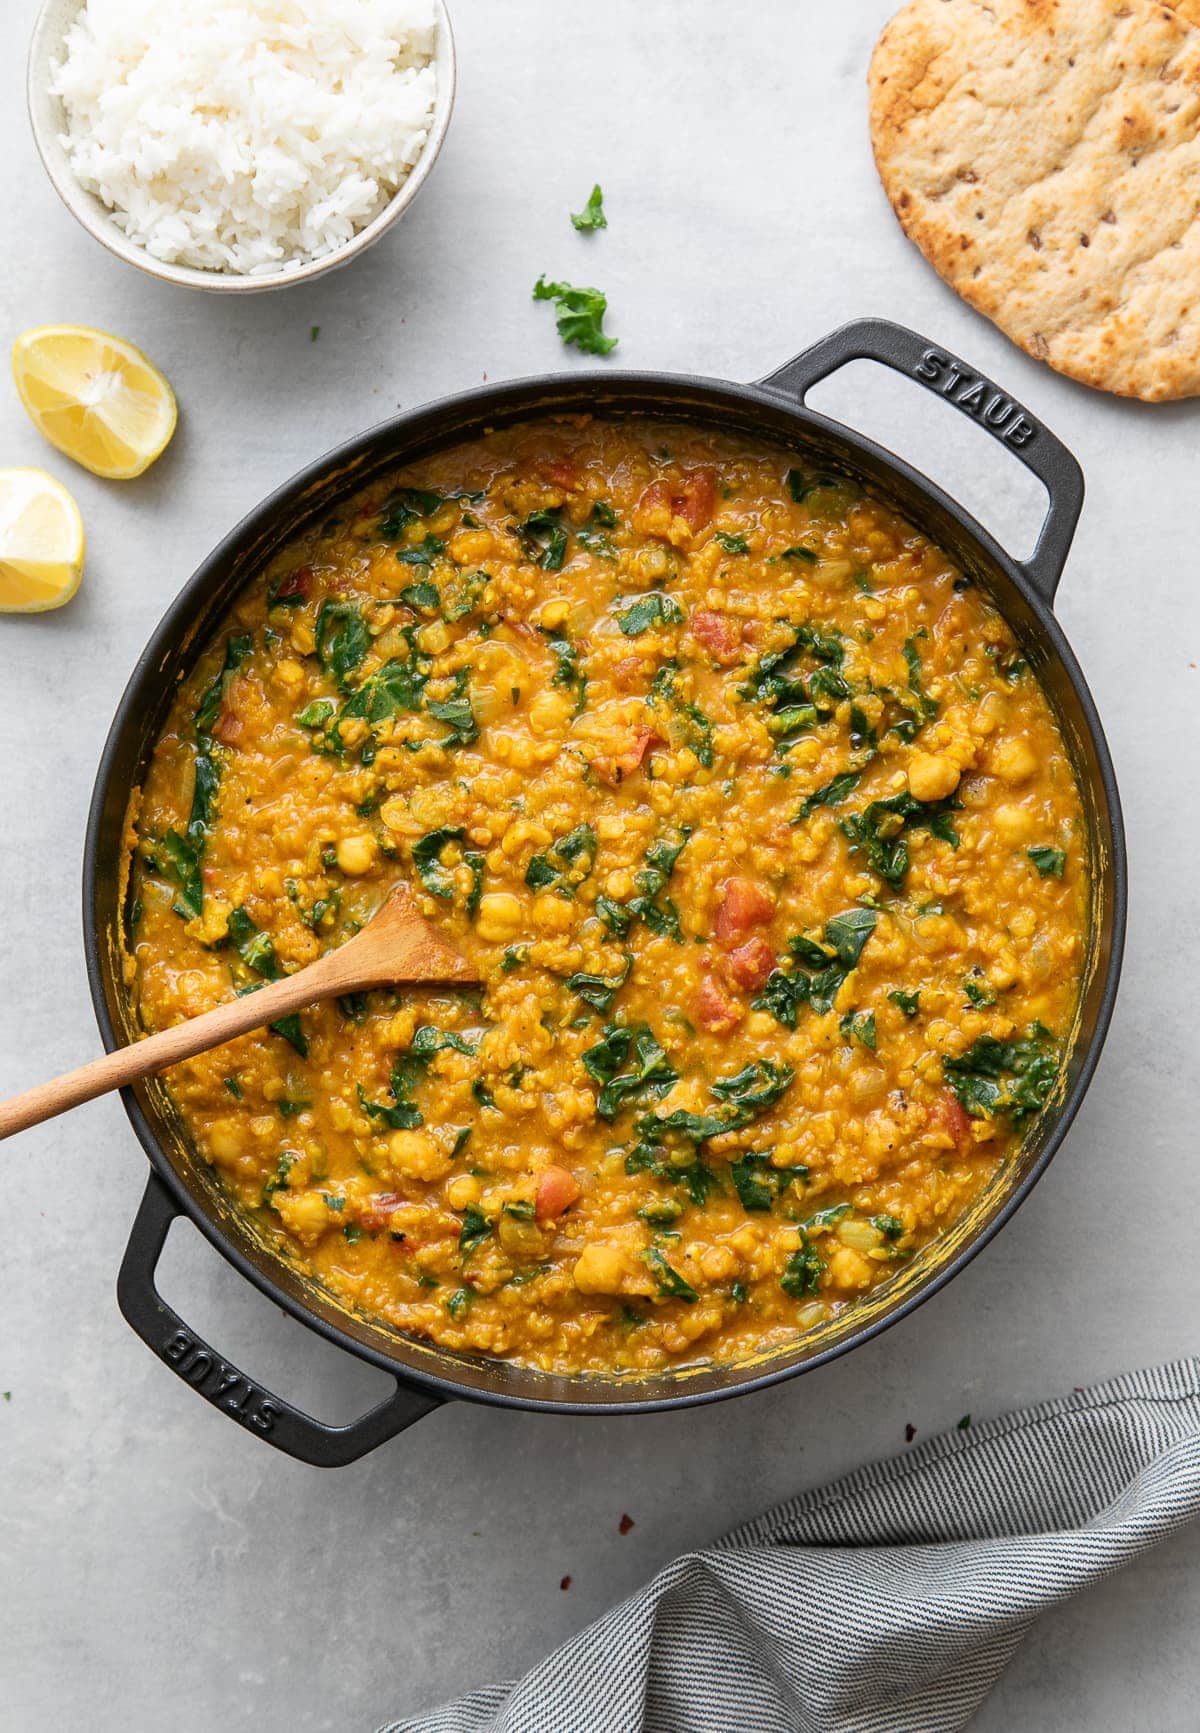 CURRY RED LENTIL STEW WITH KALE & CHICKPEAS